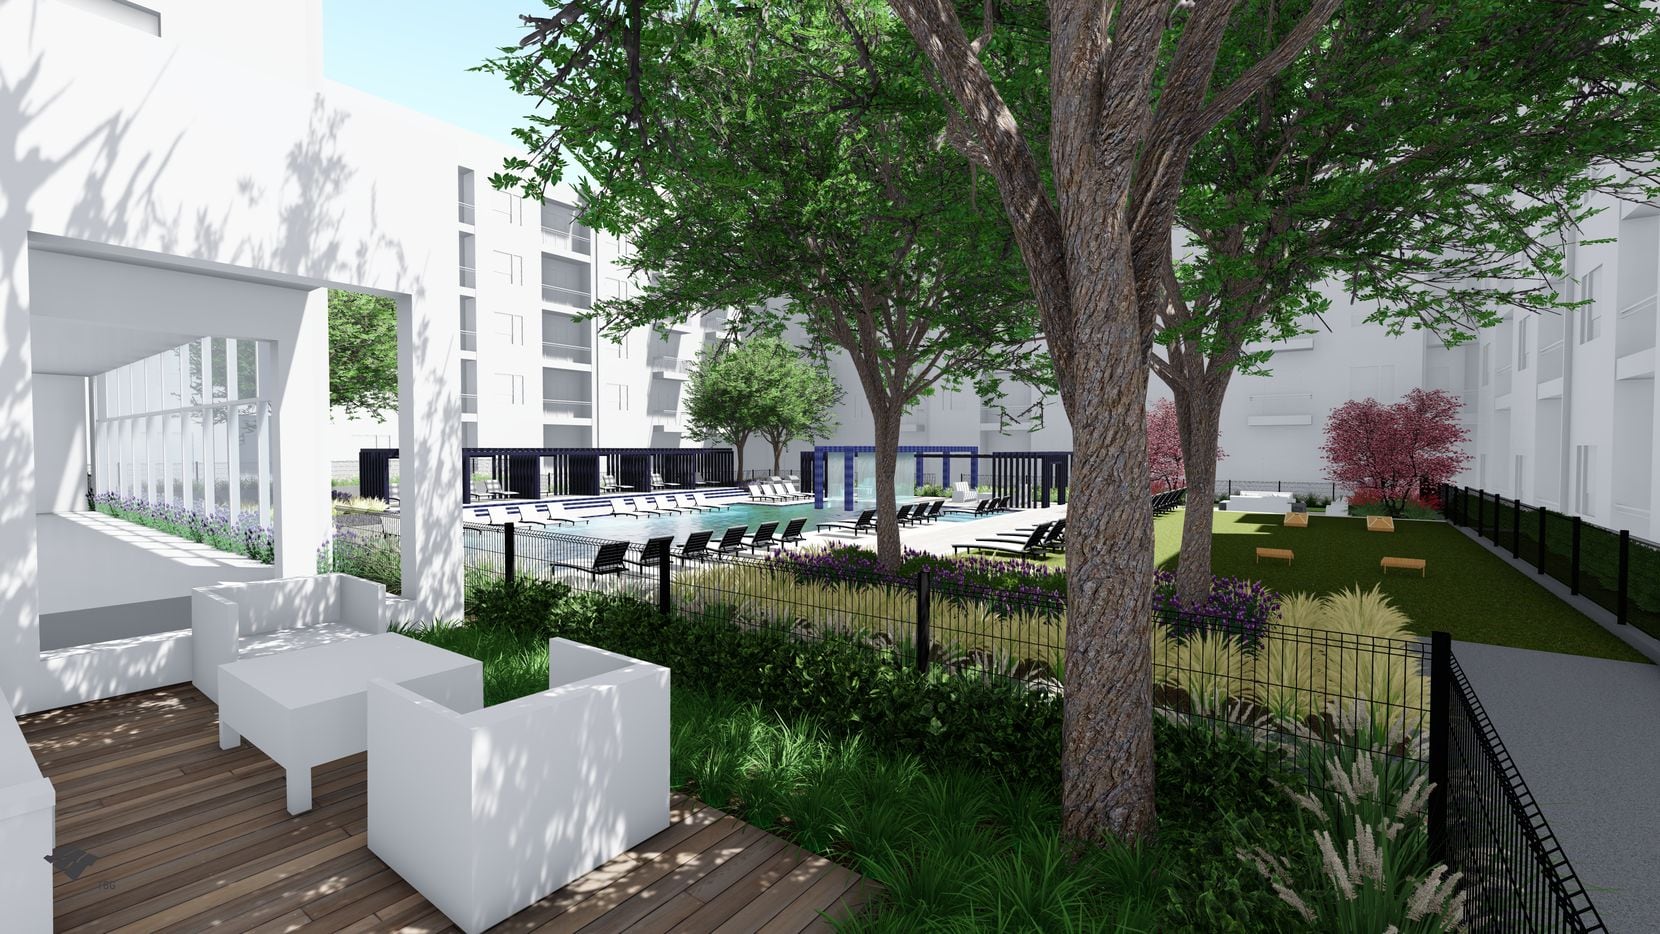 Leon Capital Group's Ross Avenue apartment development is on the site of the old Dallas...